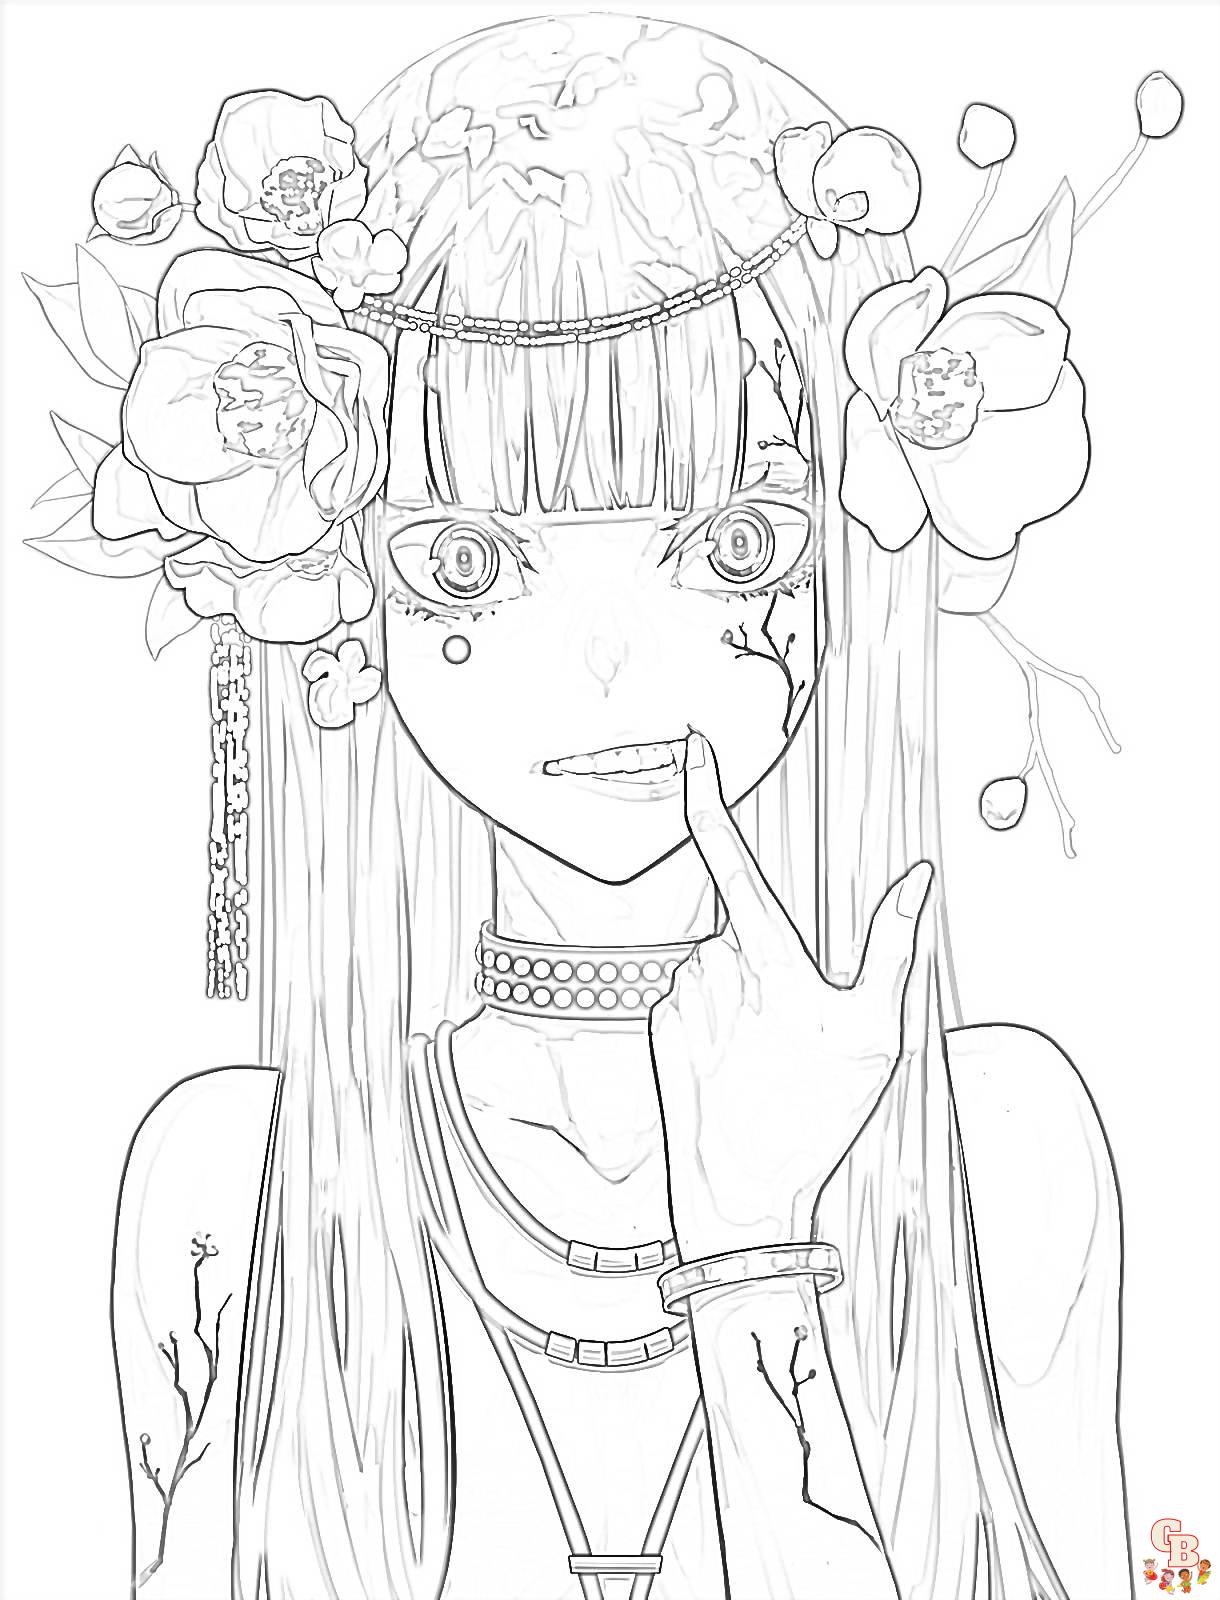 9,919 Anime Coloring Pages Images, Stock Photos & Vectors | Shutterstock